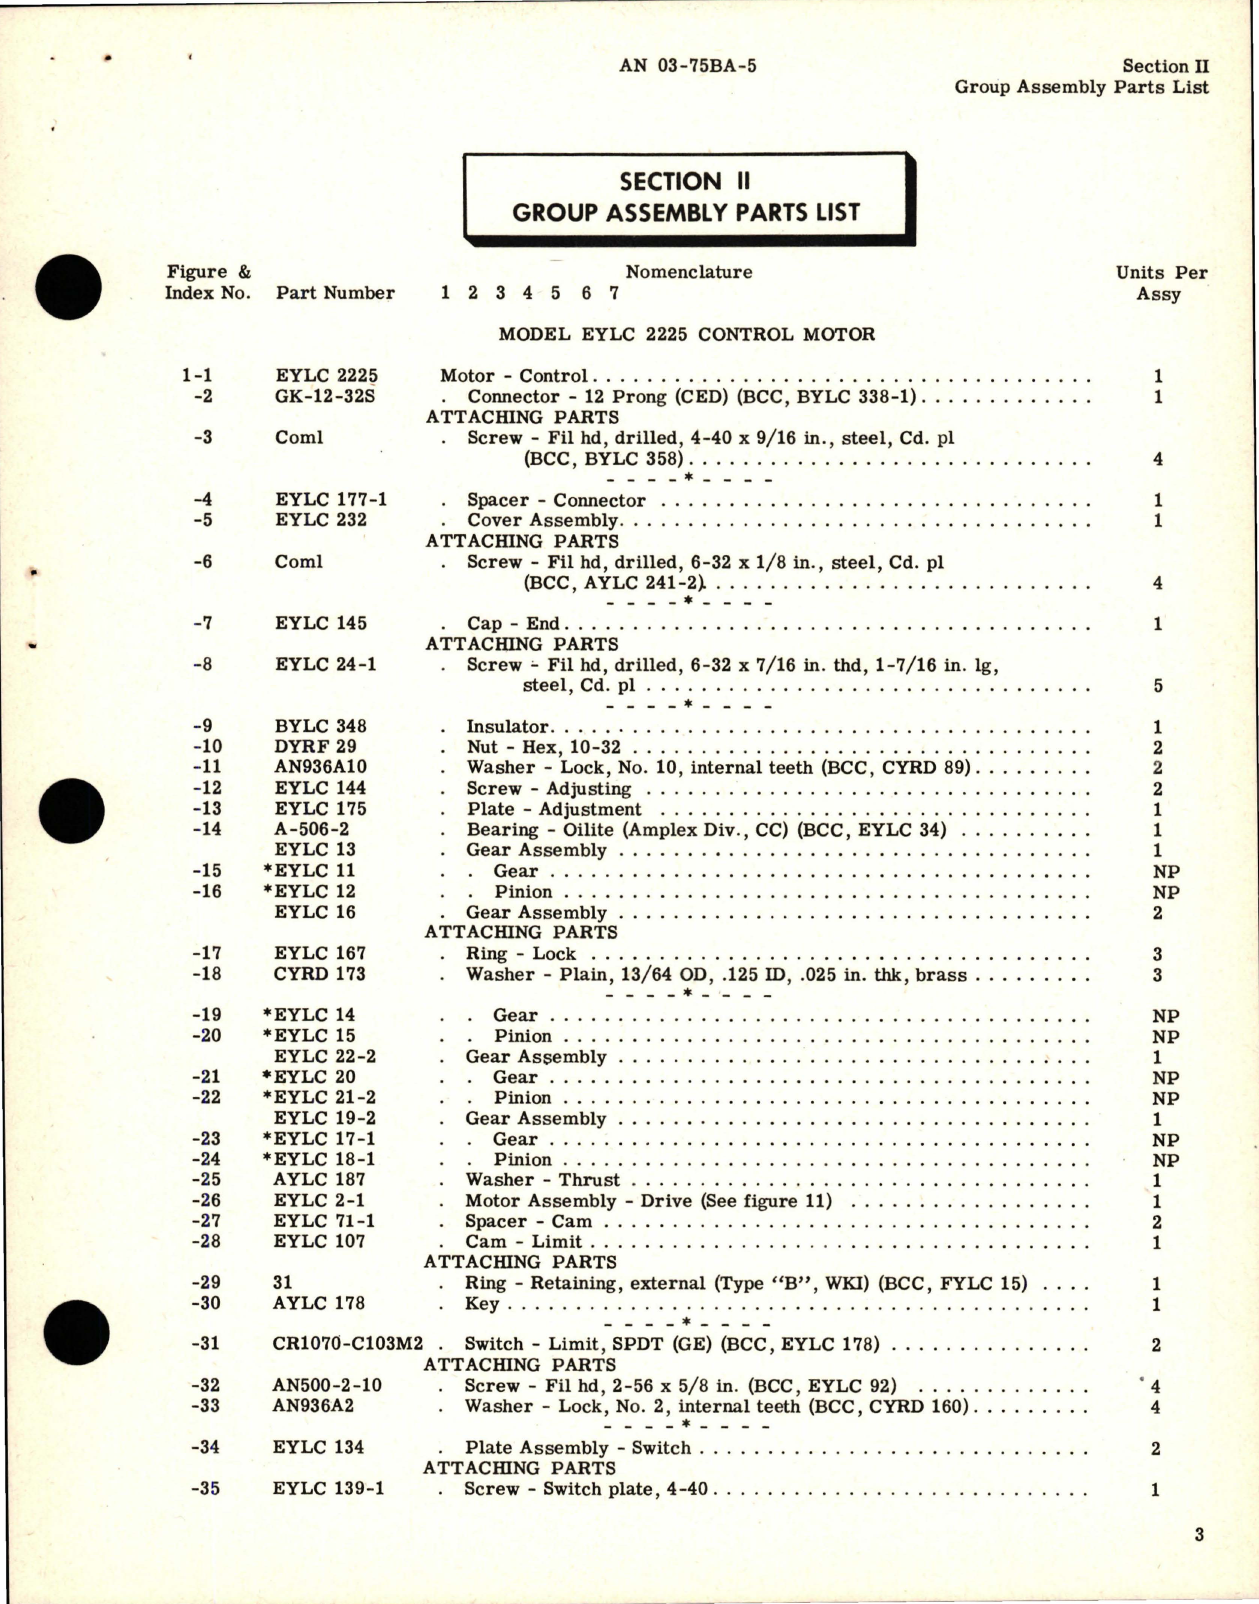 Sample page 7 from AirCorps Library document: Parts Catalog for Control Motors - Part EYLC Series 